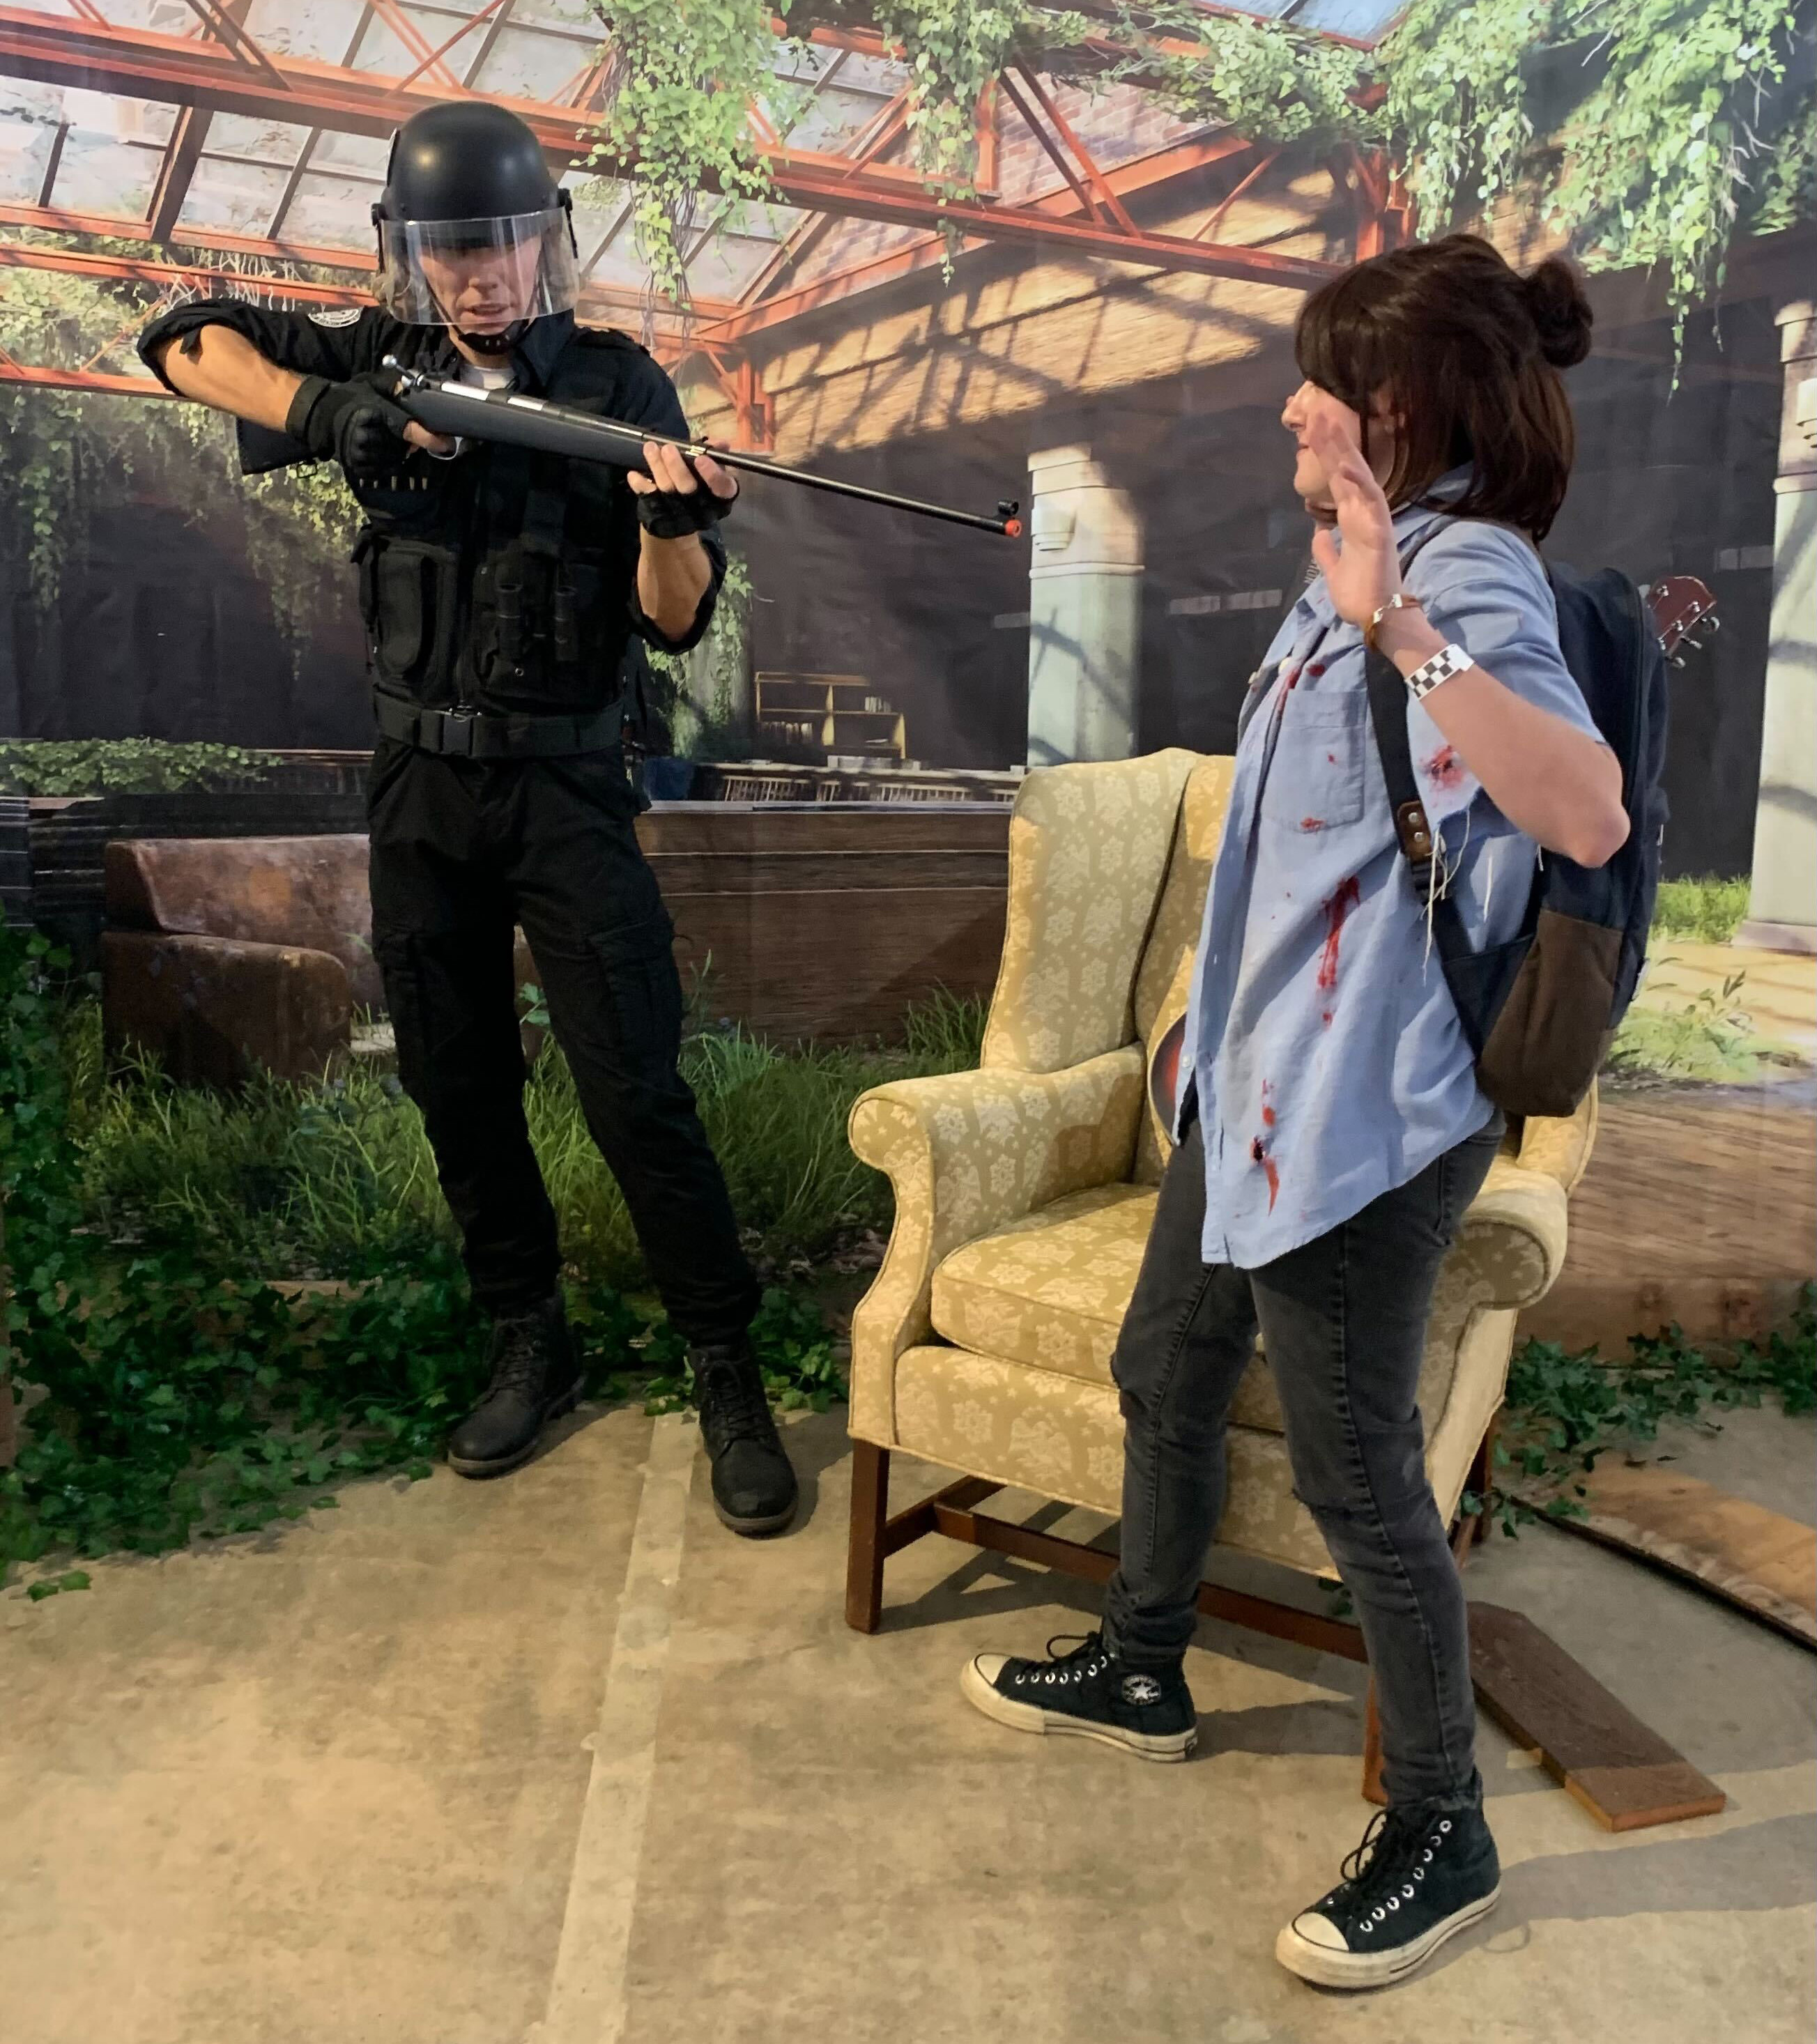 Naughty Dog on X: Ellie cosplay from #TheLastofUsPartII by sabscosplays.  Great job, Sabrina! Thanks for sharing it with us. Working on your own  Naughty Dog-inspired cosplay? Send it our way for a